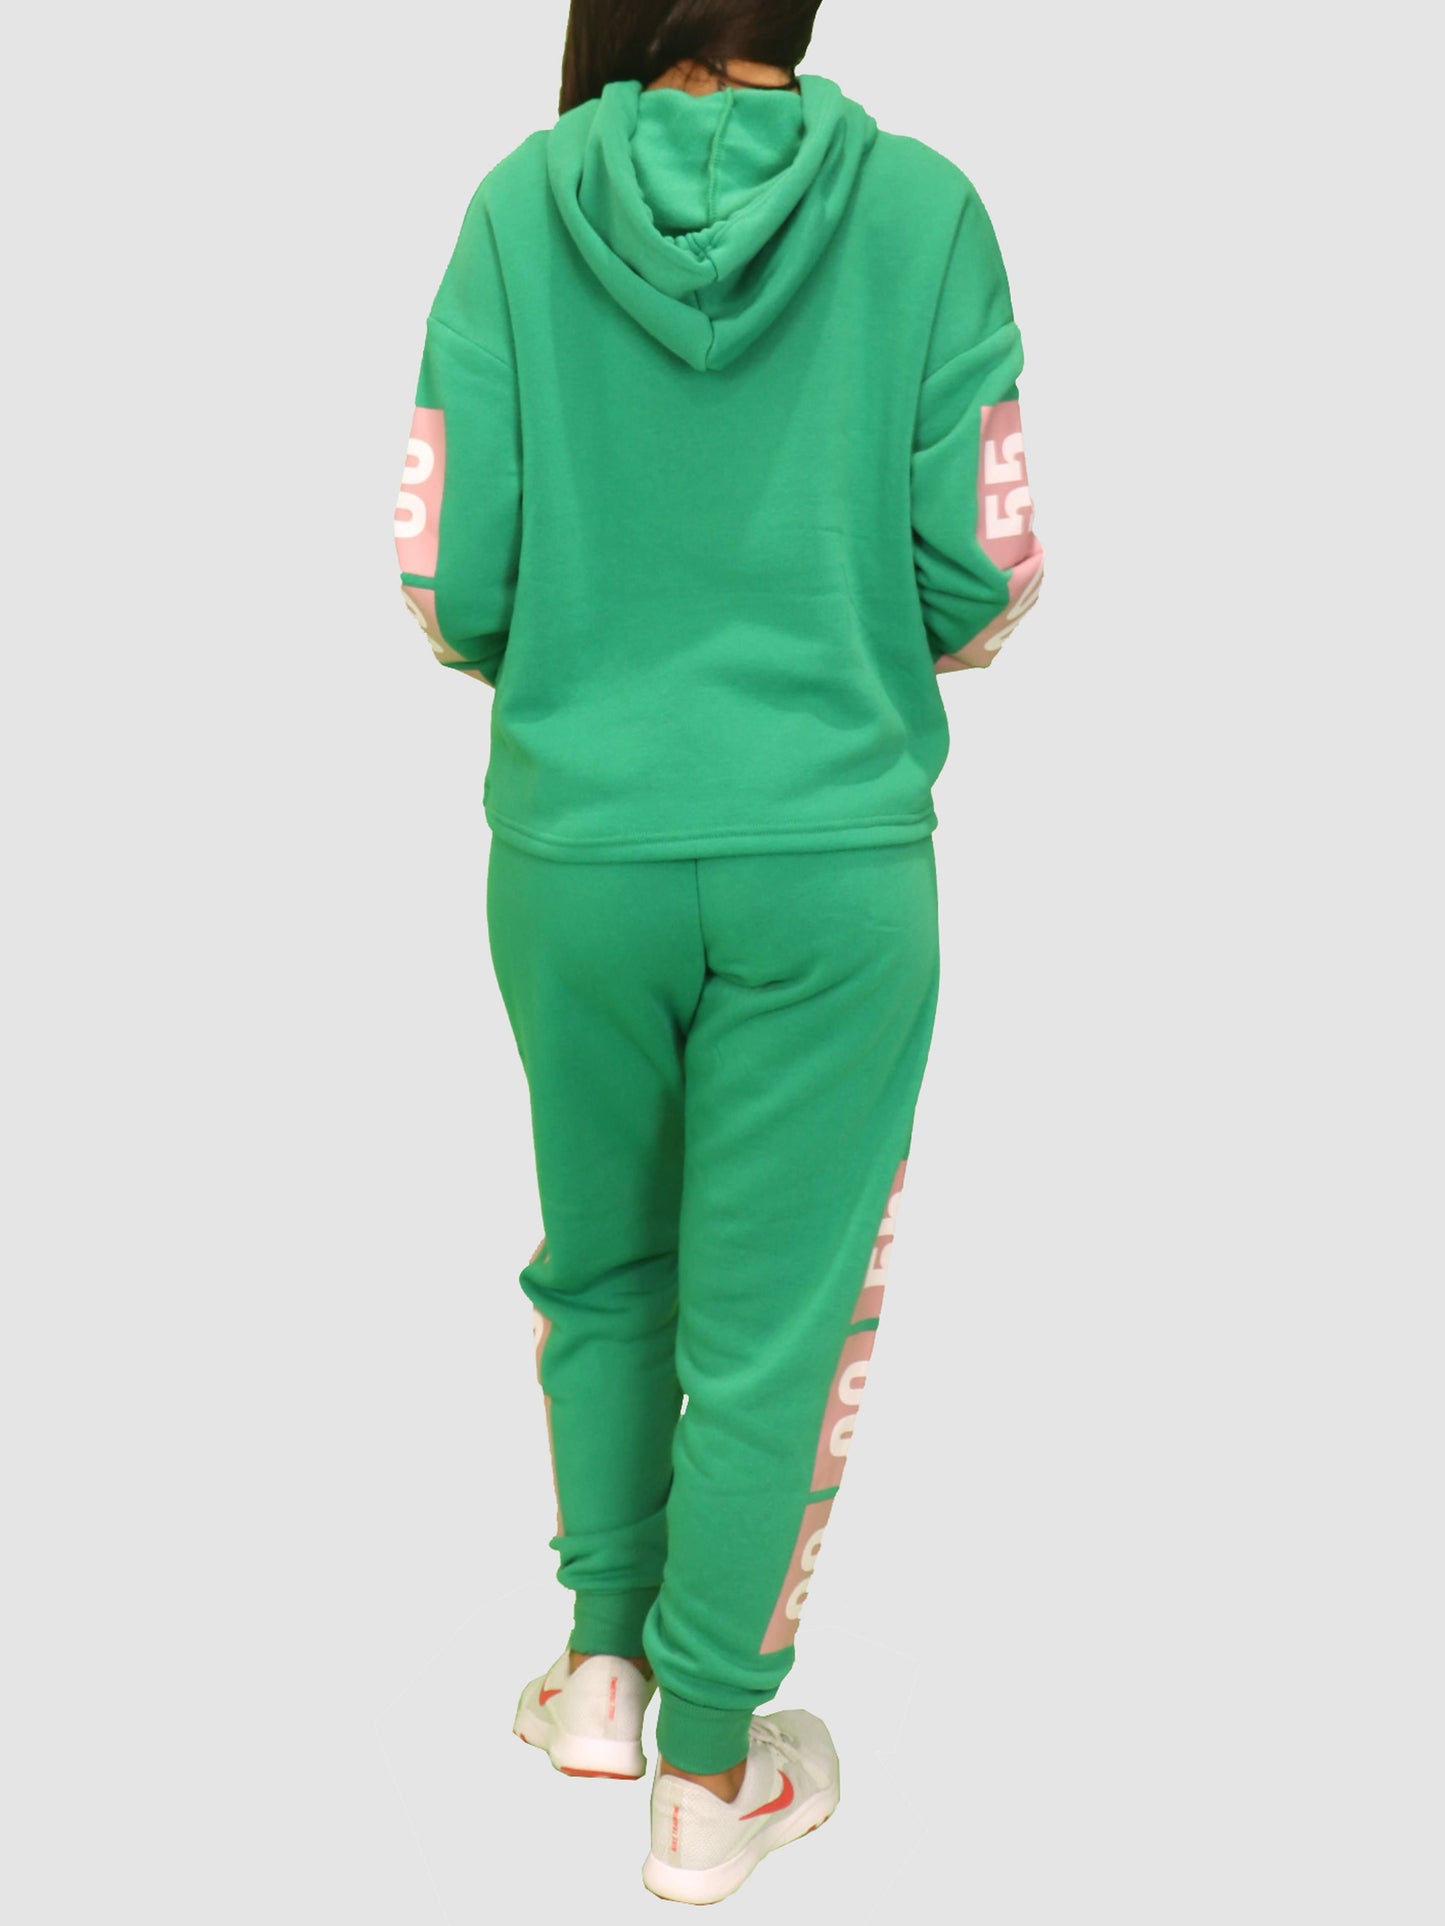 New Look Womens sports NEW LOOK - W. Attitude Jogging Suit